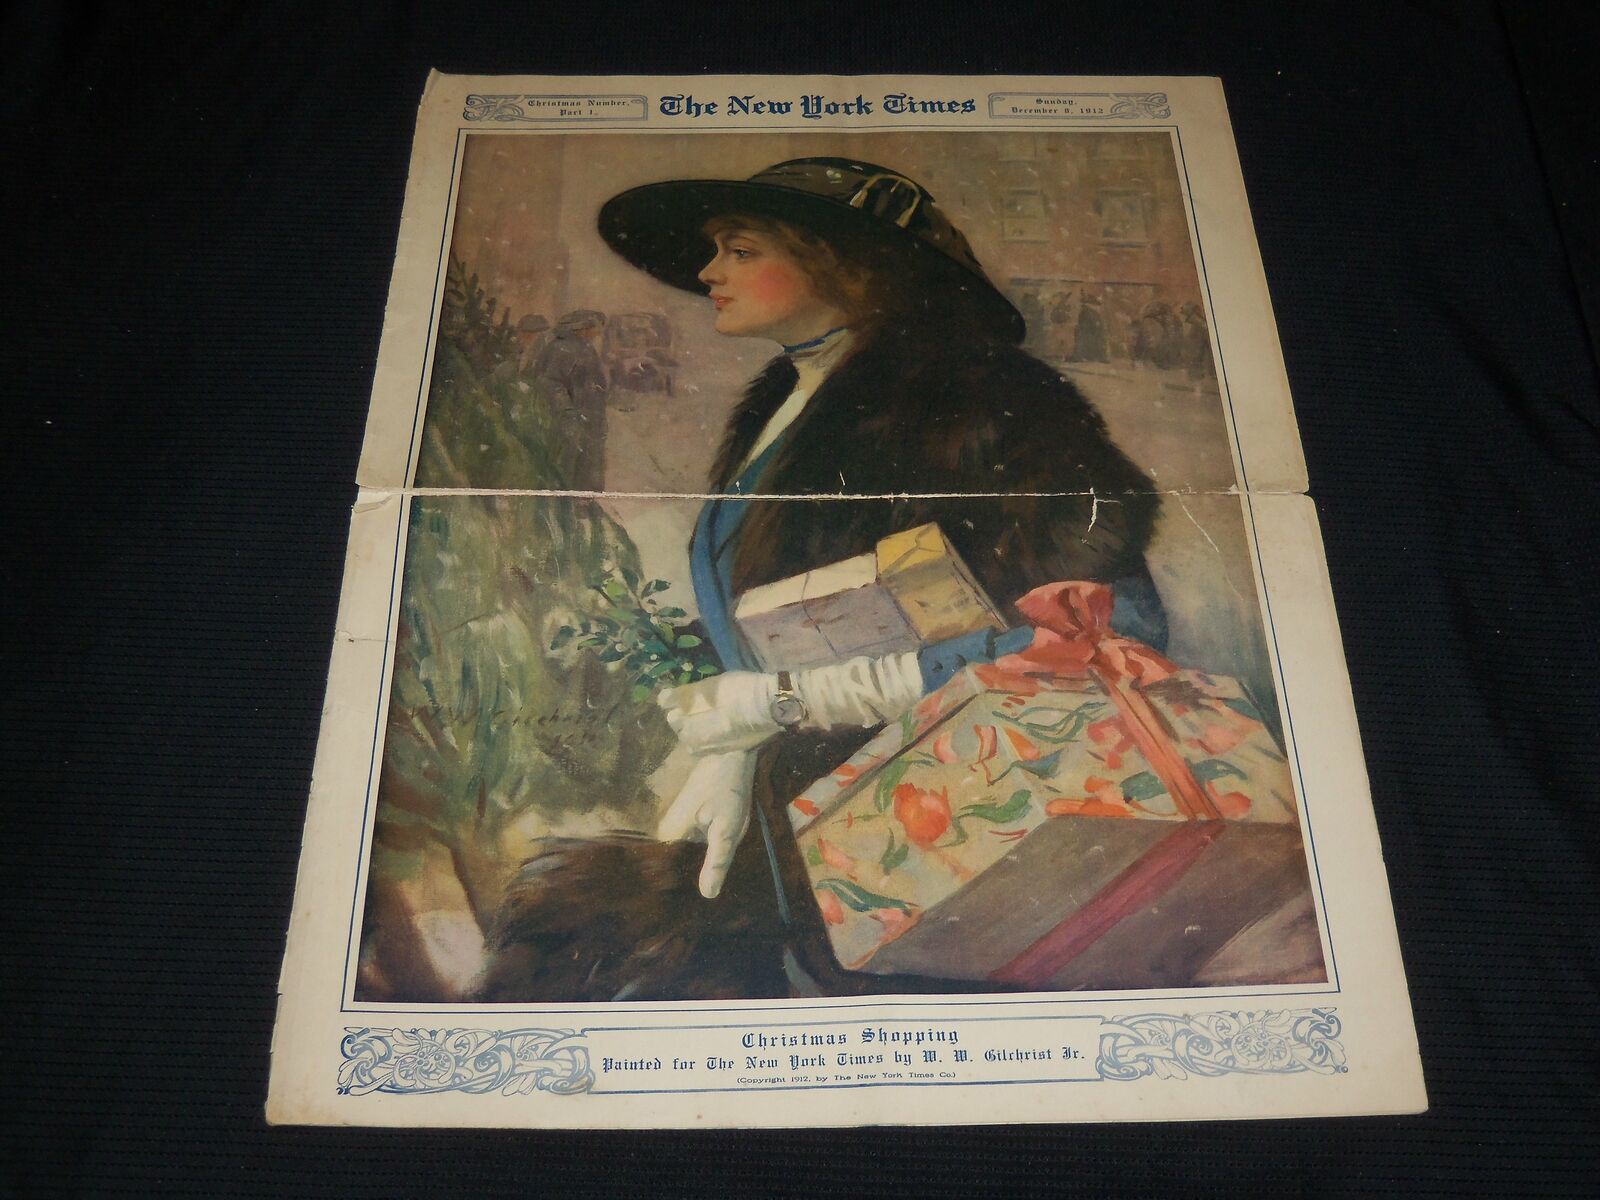 1912 DECEMBER 8 NEW YORK TIMES PICTURE SECTION - CHRISTMAS NUMBER - NP 5621